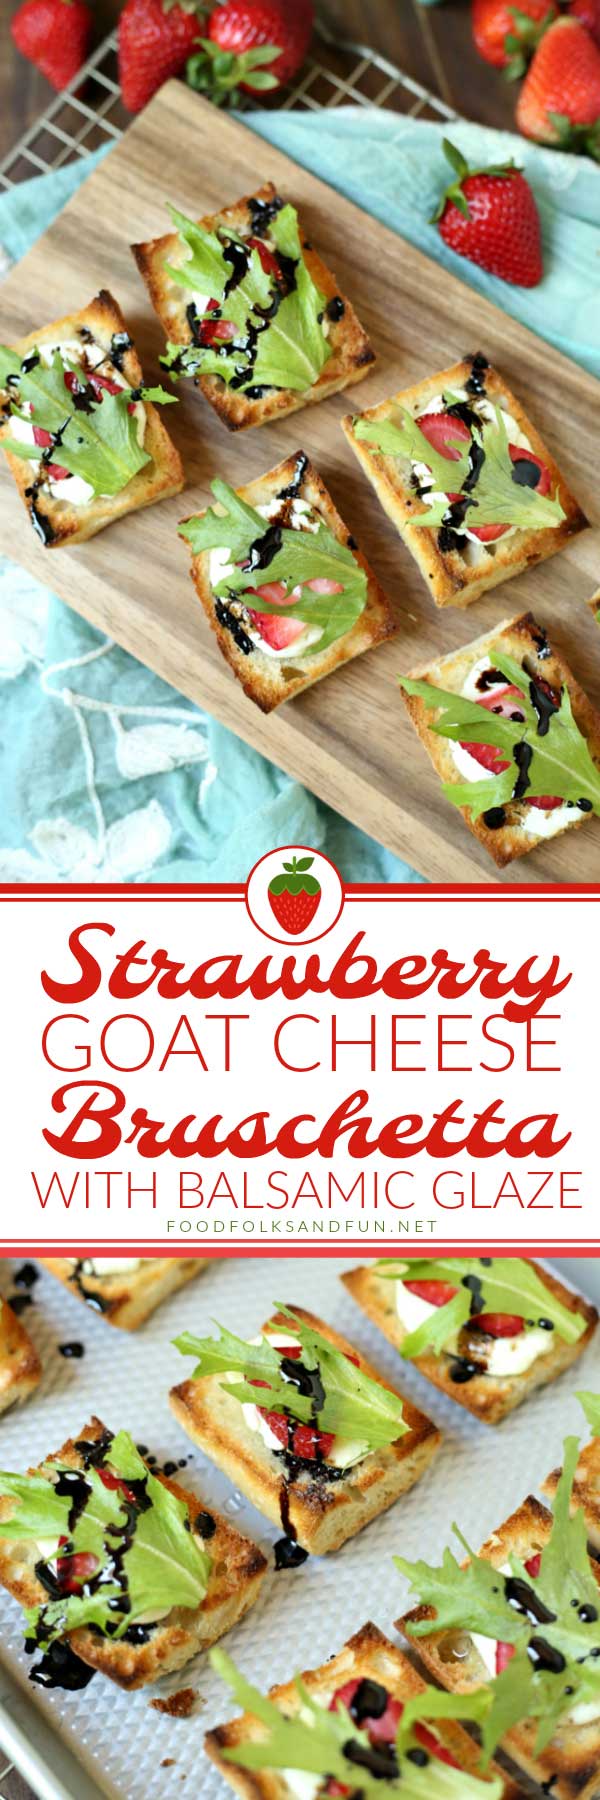 This Strawberry Goat Cheese Bruschetta with Balsamic Glaze is the appetizer of summer! It's fresh, bright flavors are just the thing for a summer party, barbecue, or even light dinner. via @foodfolksandfun